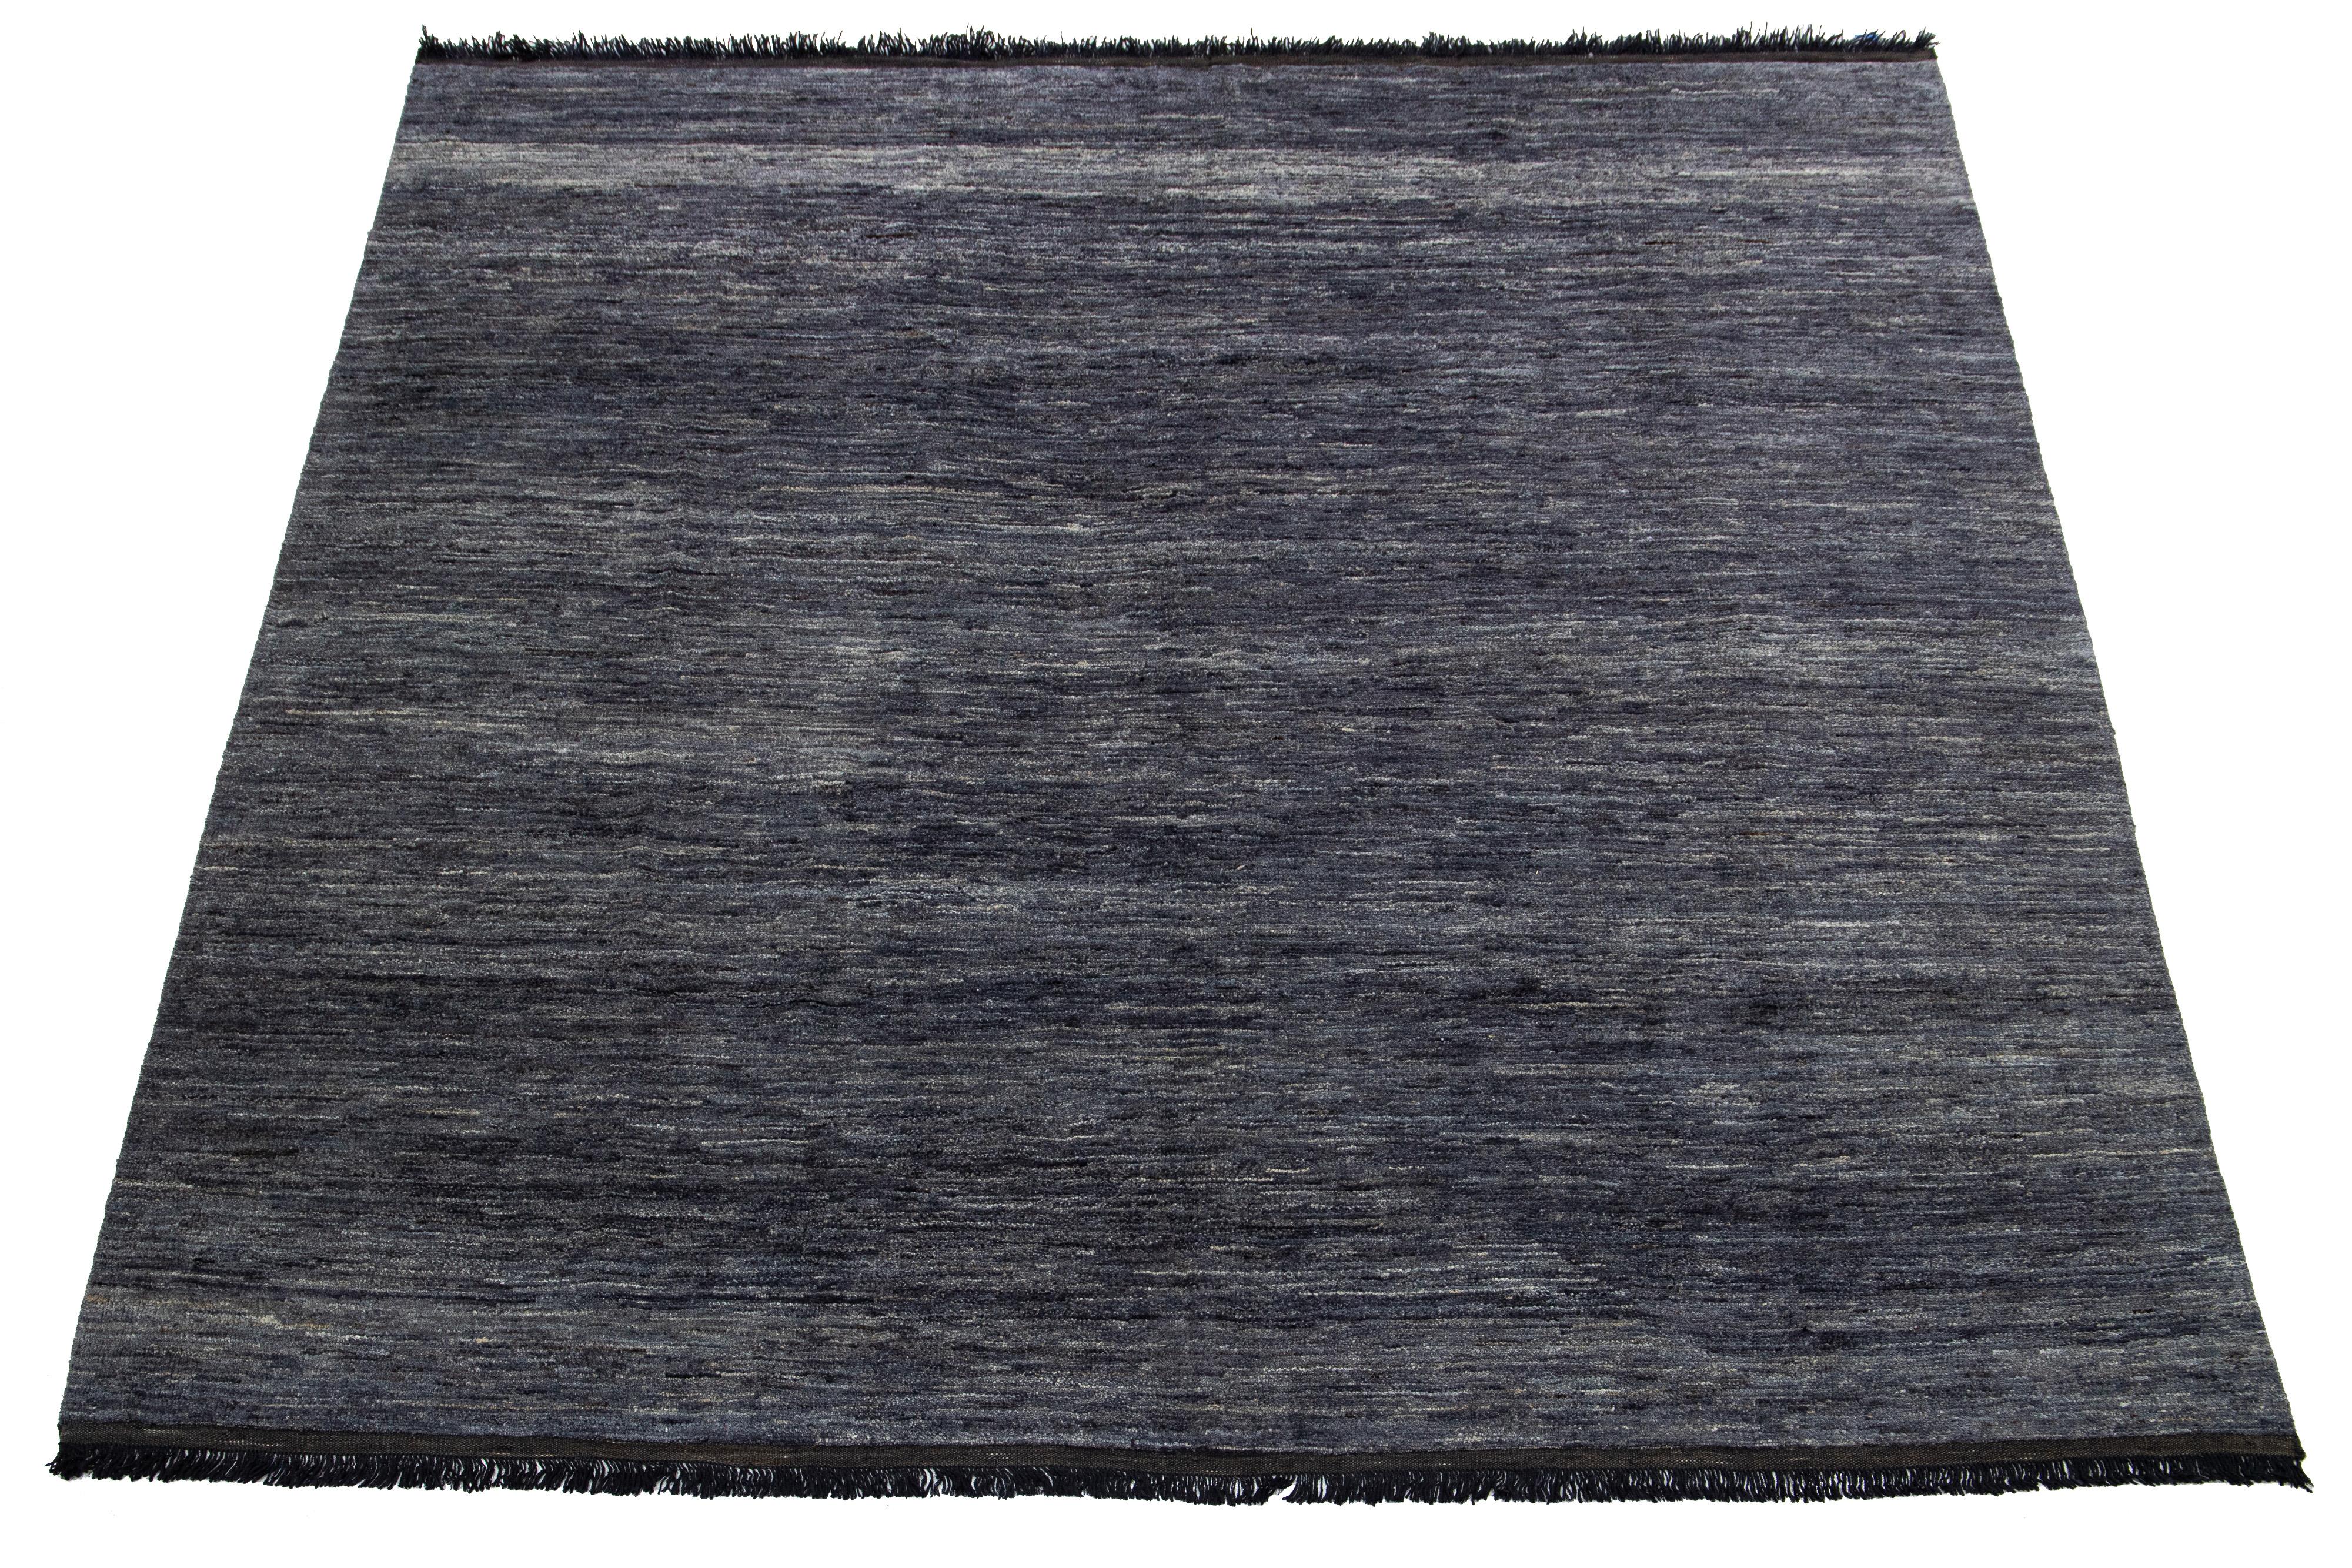 This handcrafted wool rug, designed in the Gabbeh style, features a solid design highlighted by black fringes and a gray-charcoal background.

This rug measures 8'3